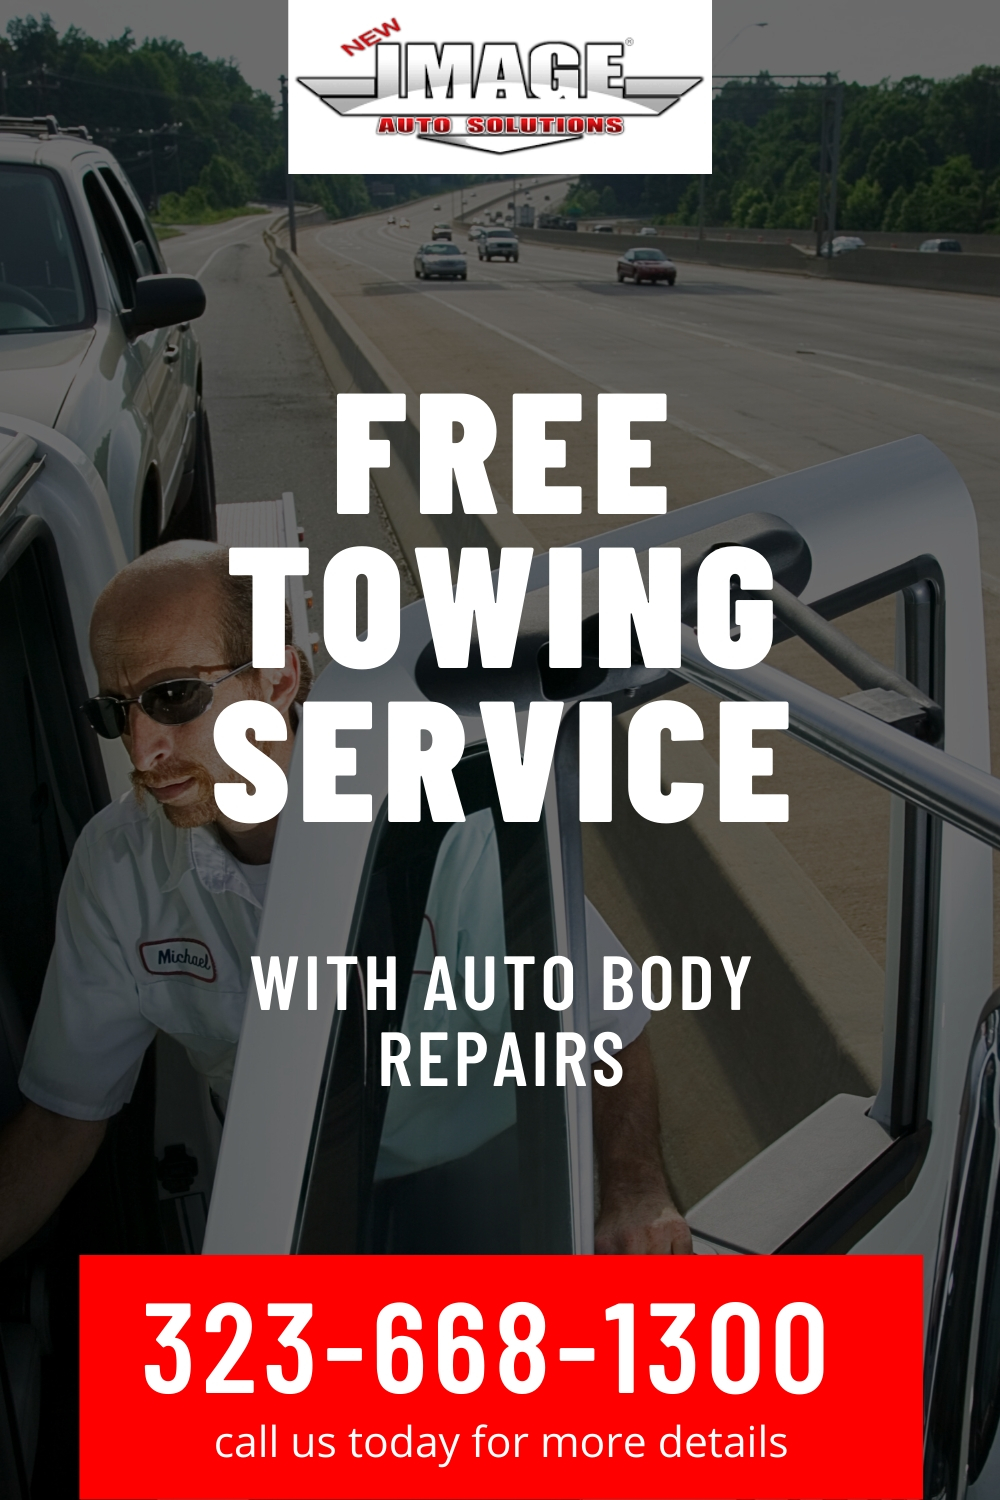 Auto body repair towing service